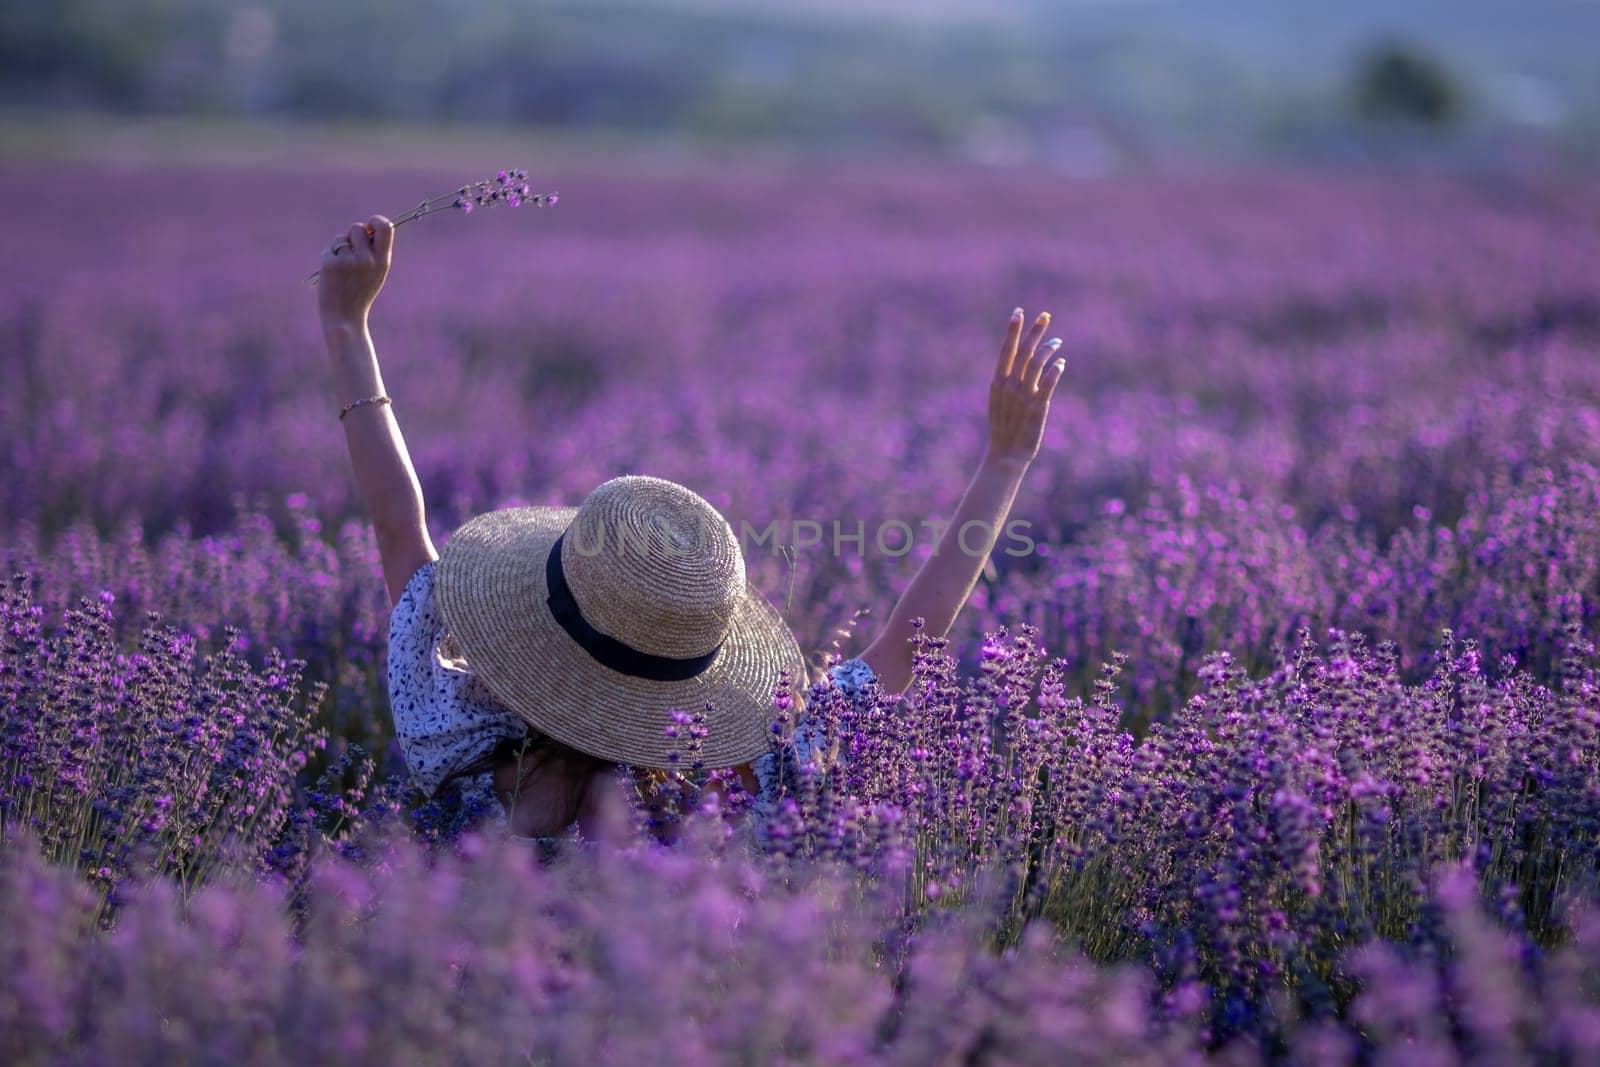 A woman is in a field of purple flowers, wearing a straw hat and holding a flower. Scene is peaceful and serene, as the woman is surrounded by the beauty of nature